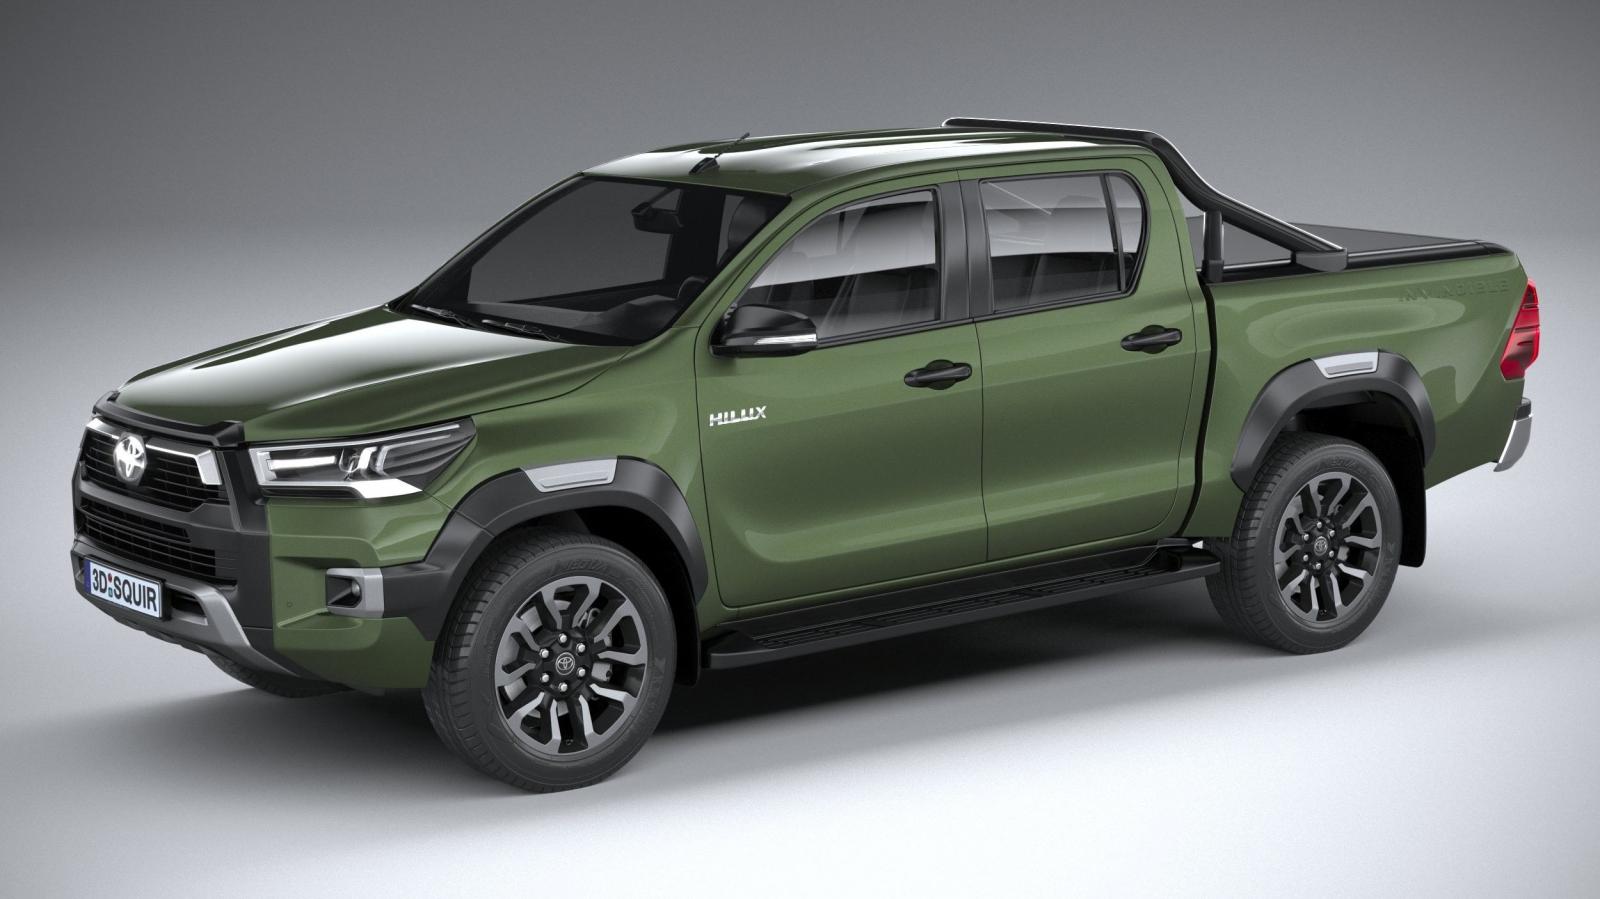 Toyota Hilux inches closer to India launch